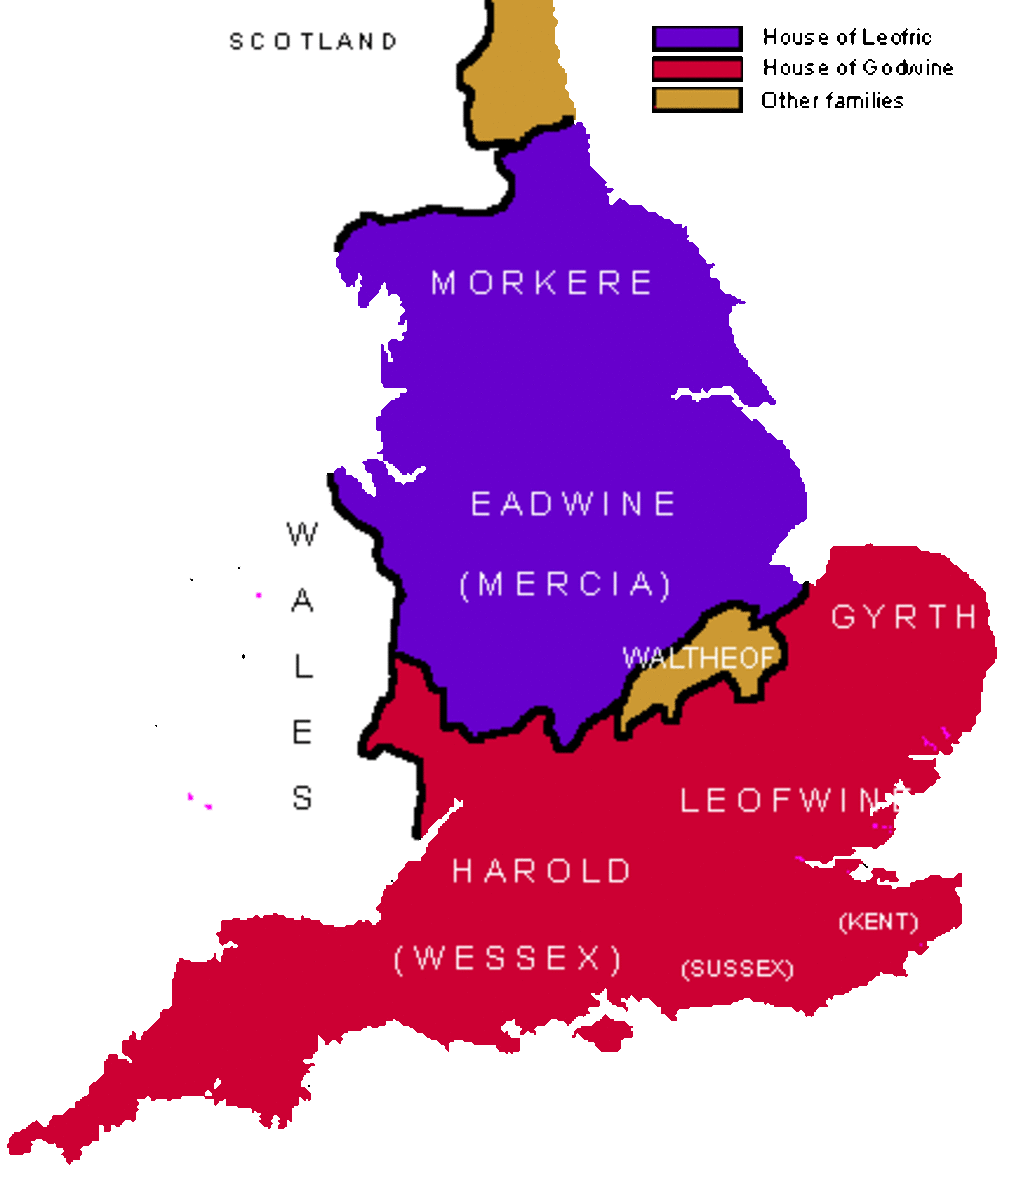 The earldoms in England, 1065, before Harold's coronation early in 1066 at Eadward's Westminster abbey church